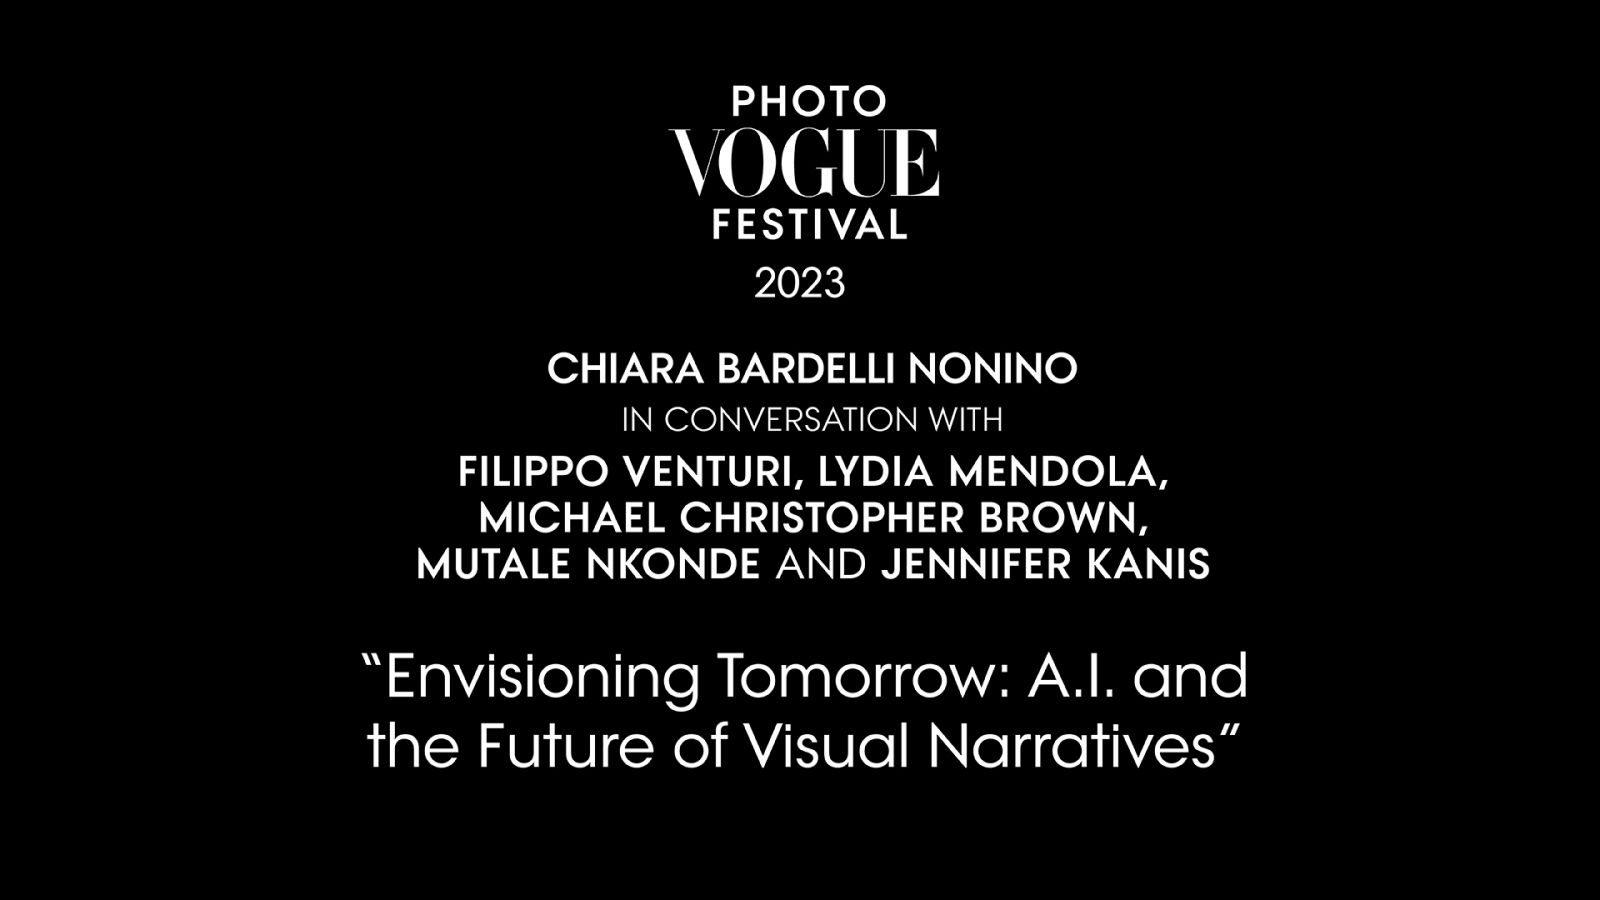 Envisioning Tomorrow: A.I. and the Future of Visual Narratives” (Panel Discussion)